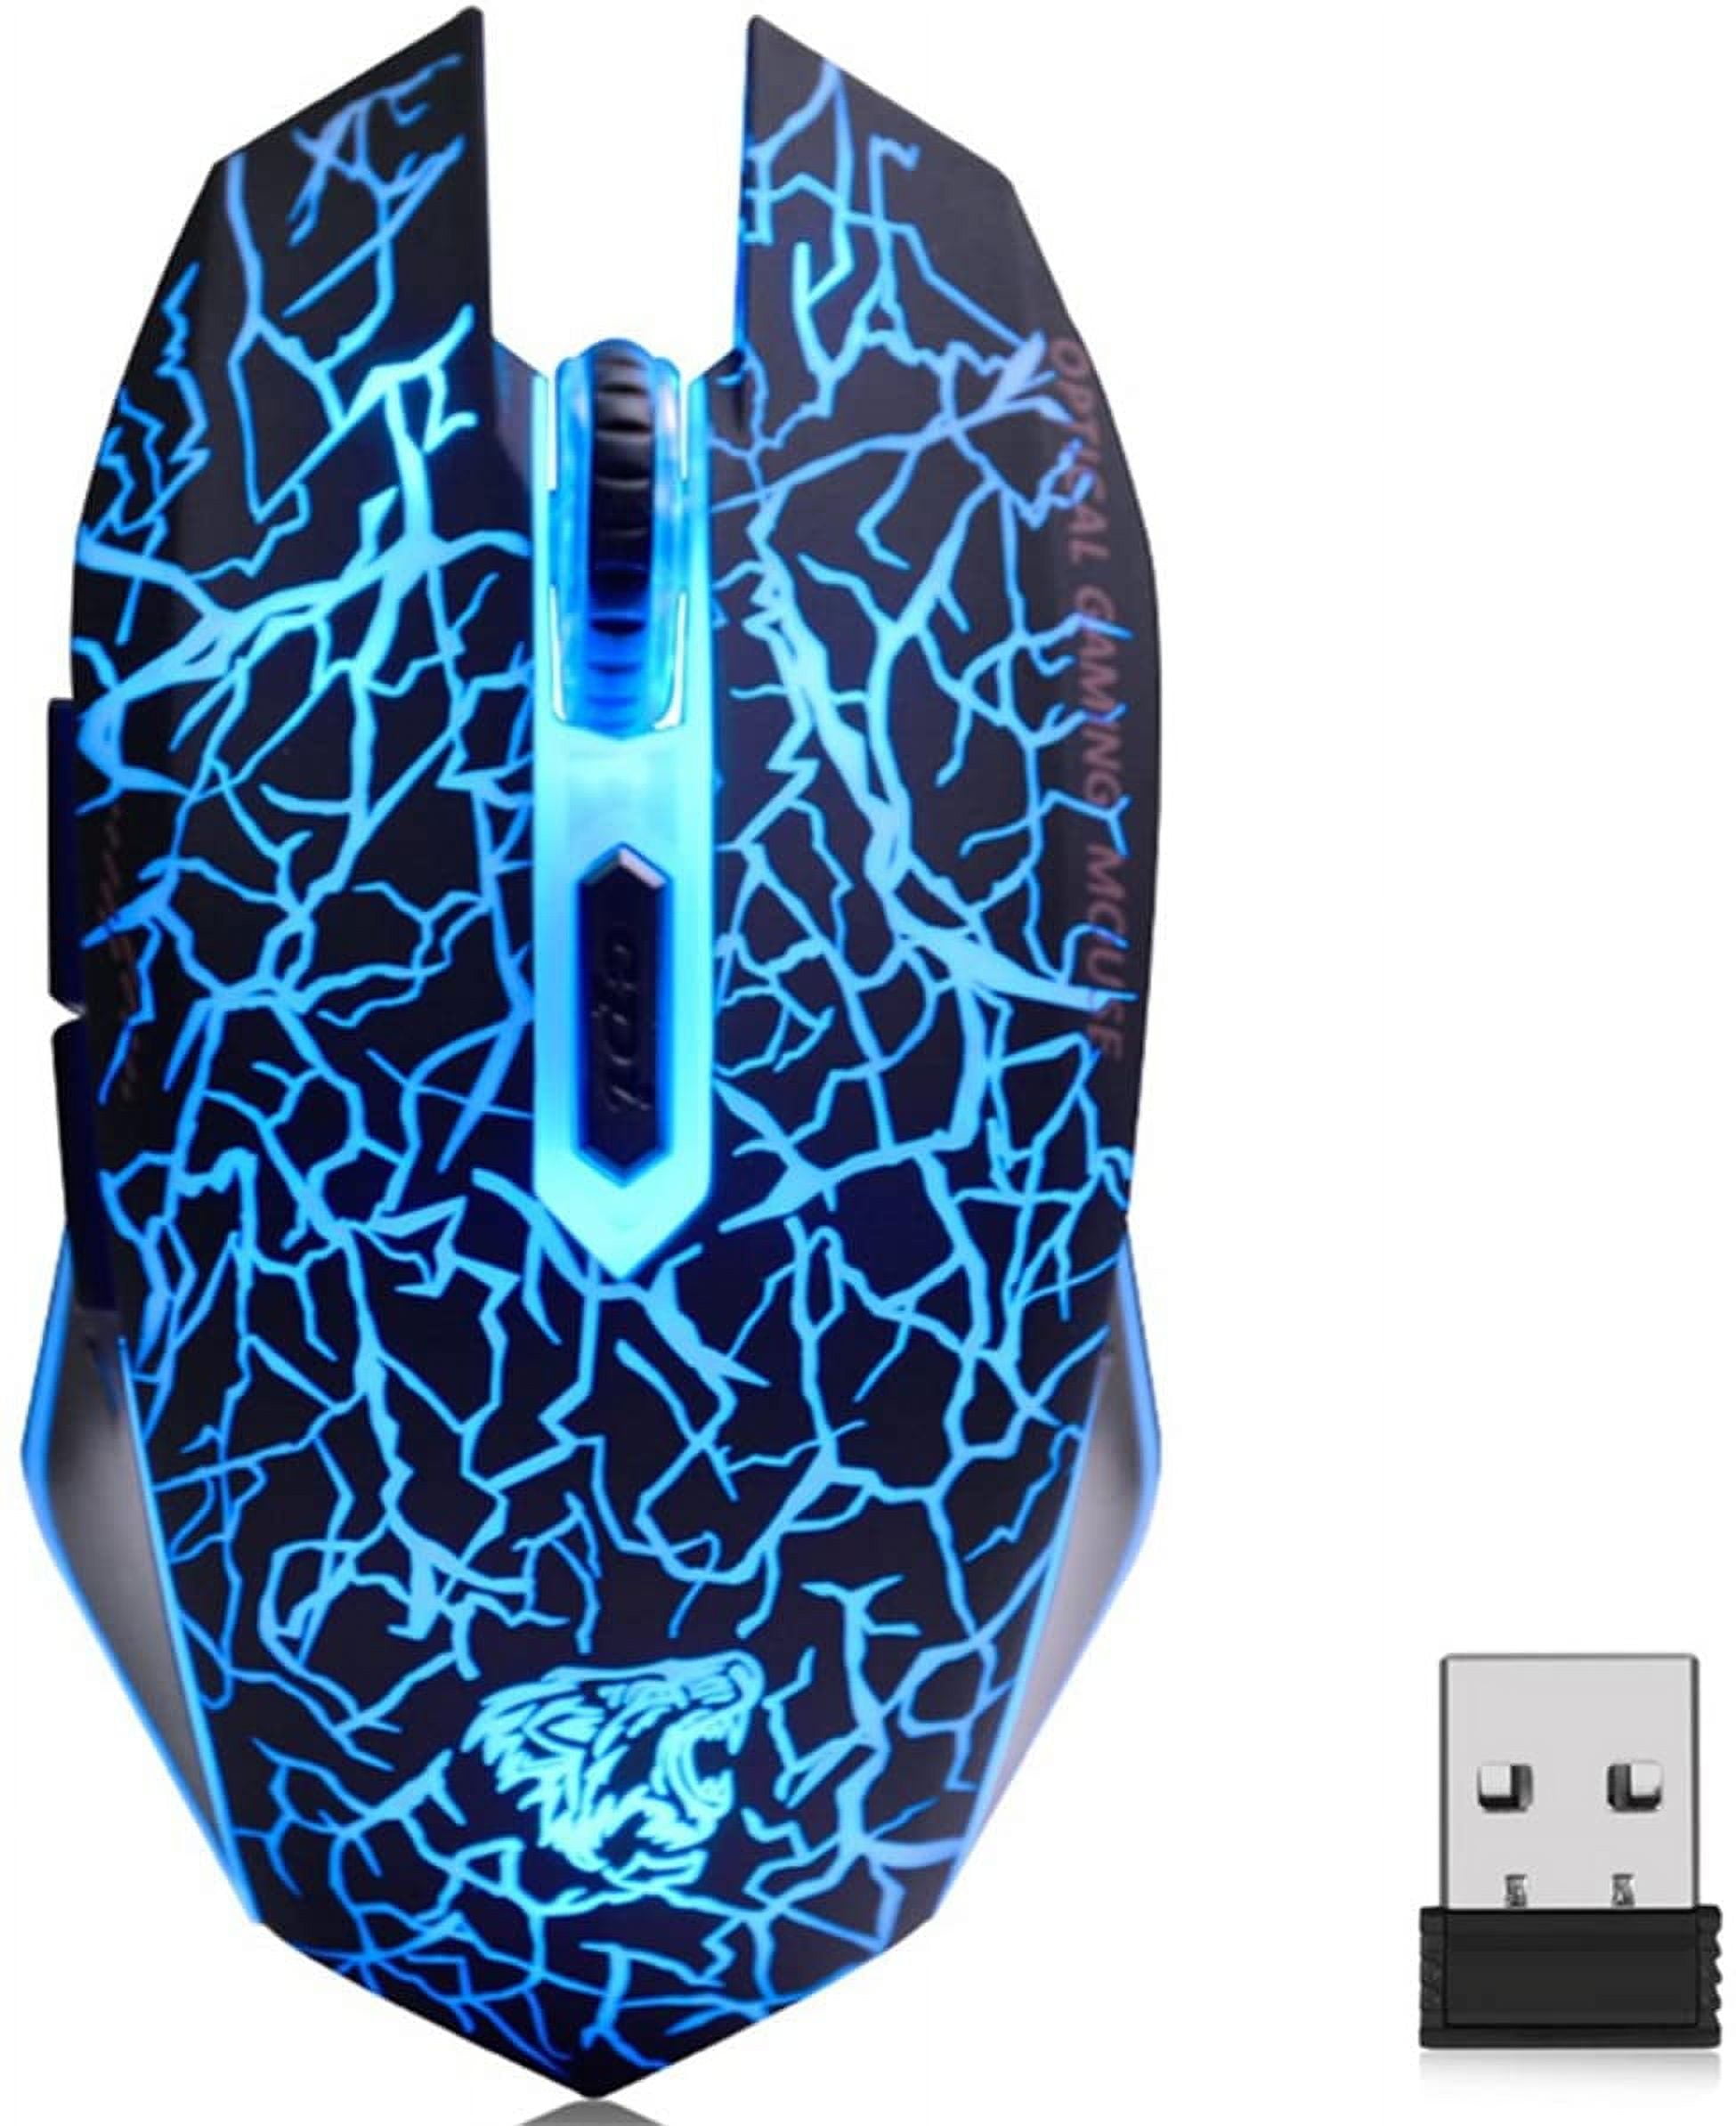 Wired Gaming Mouse 3200DPI 7 Buttons 7 Color LED Optical Computer 